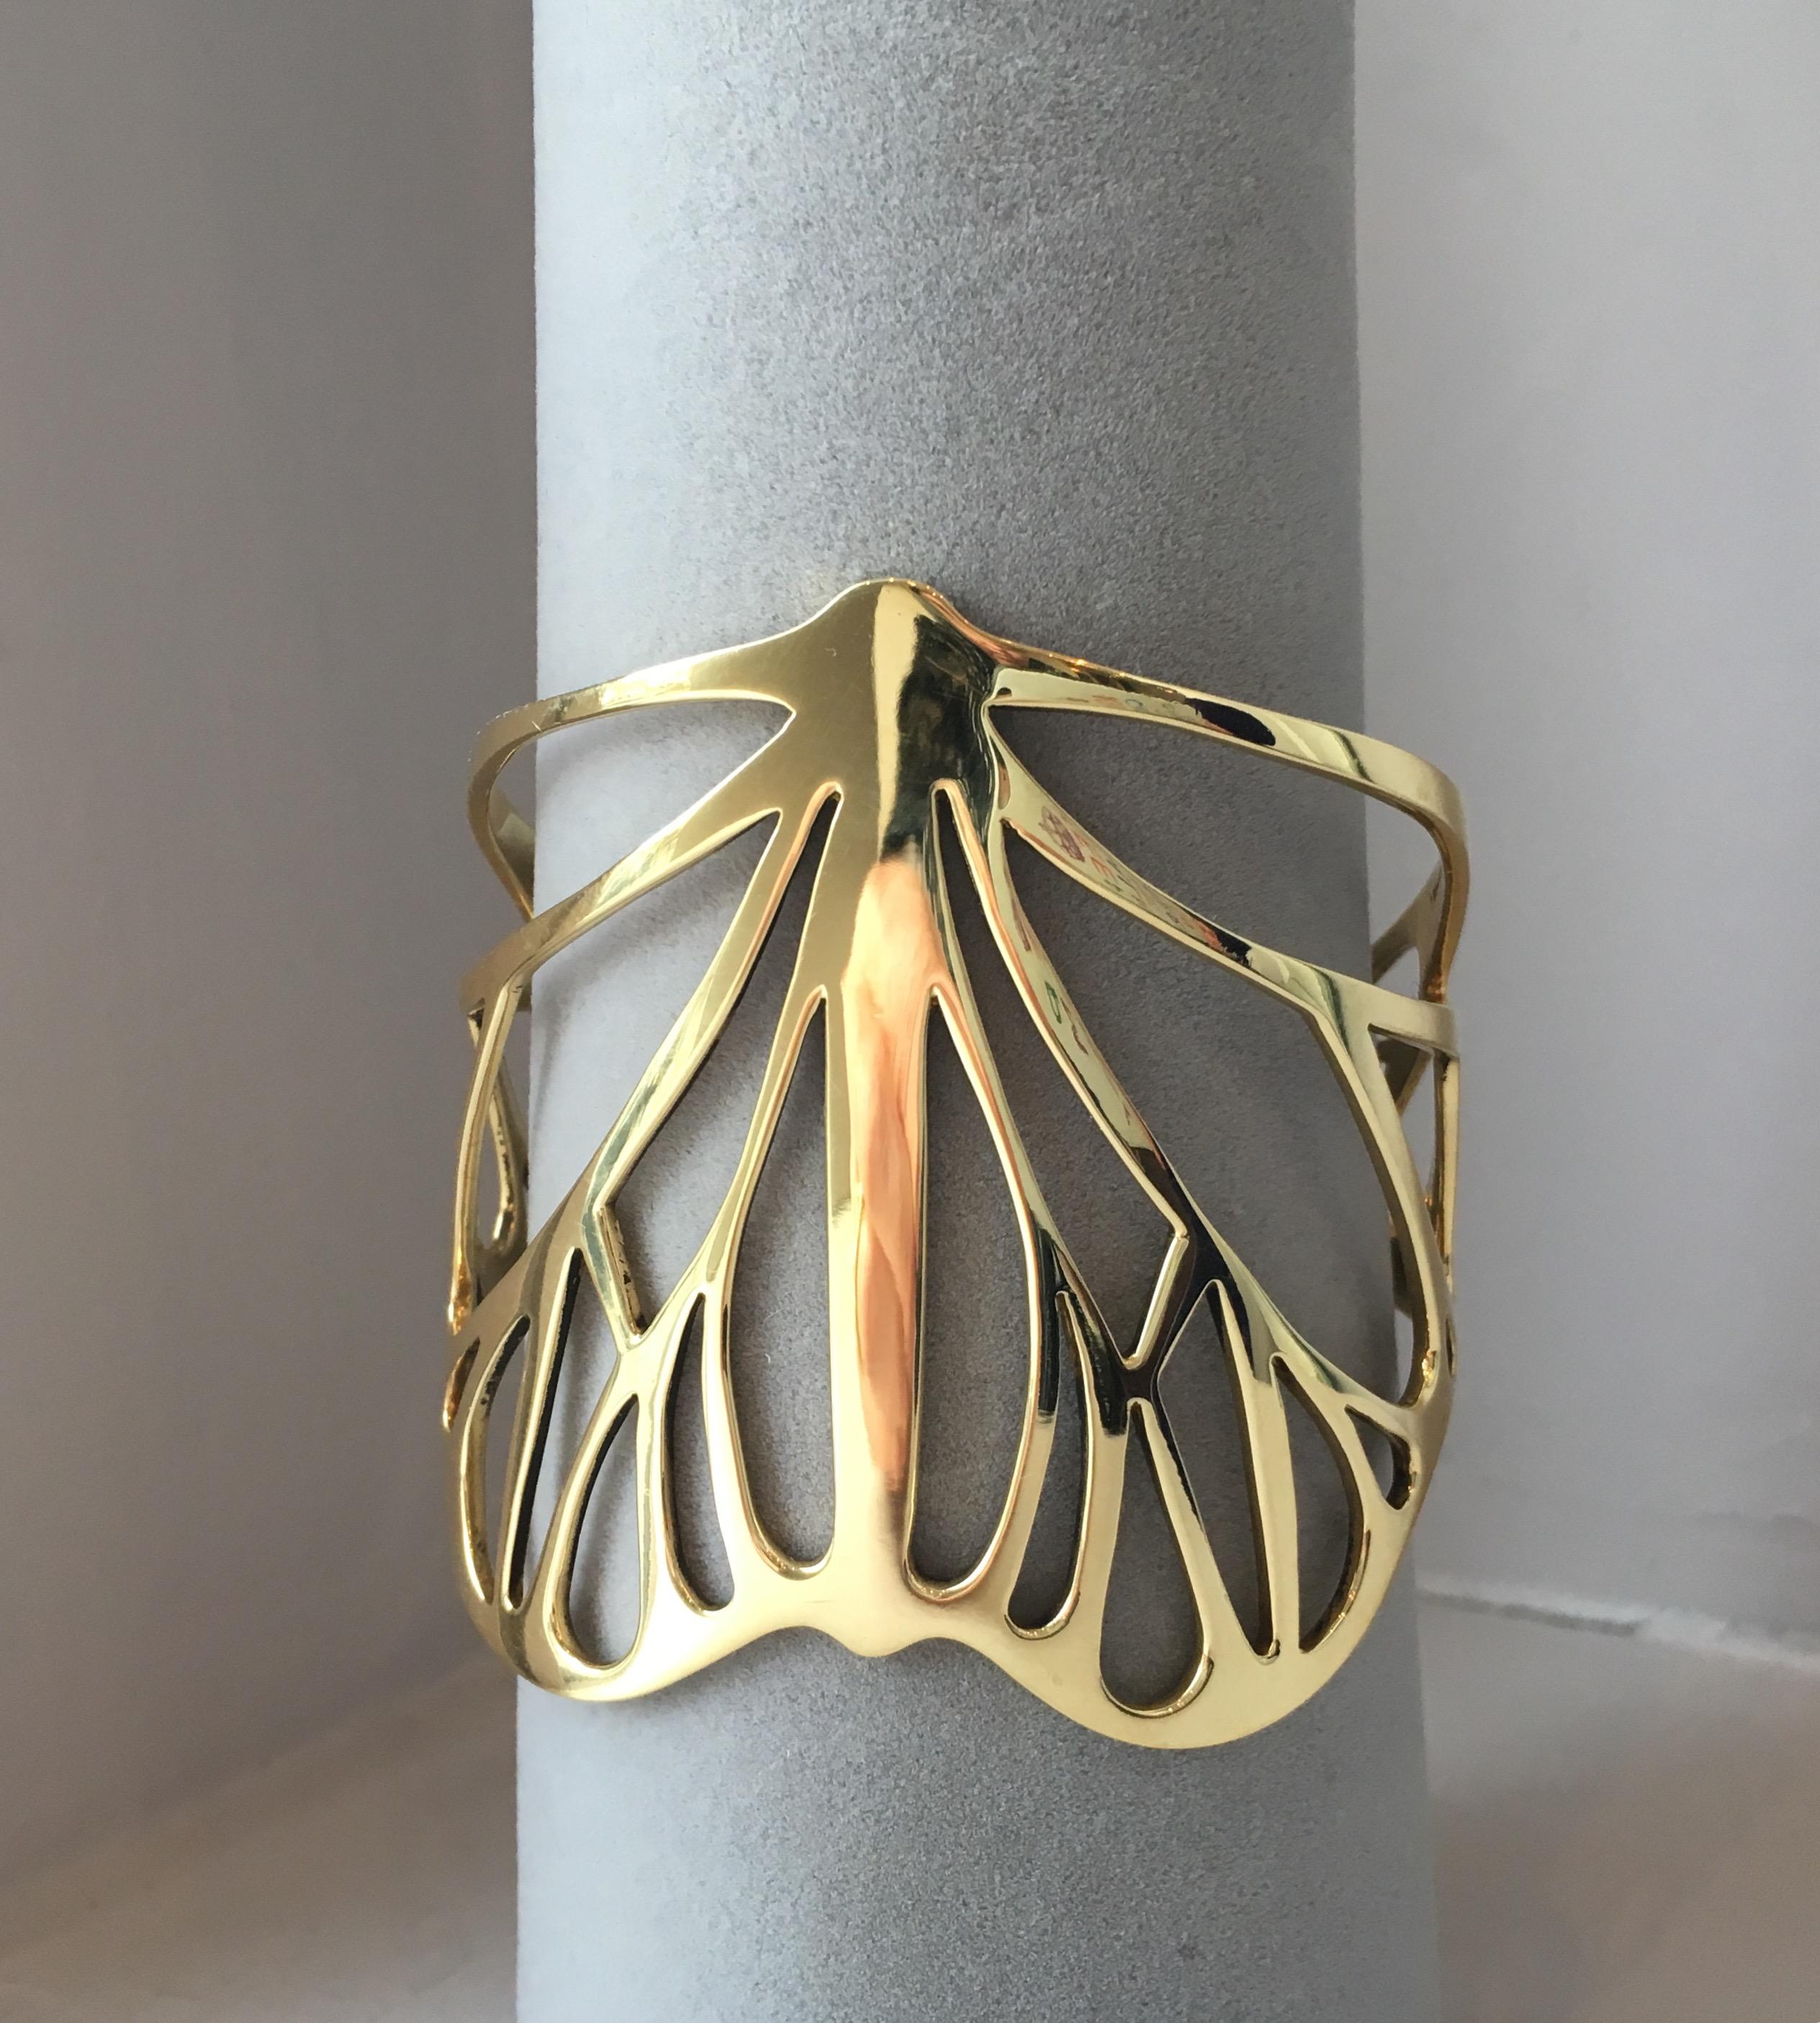 Lilly Hastedt Butterfly Cuff Bracelet in 18 Karat Gold In New Condition For Sale In London, GB